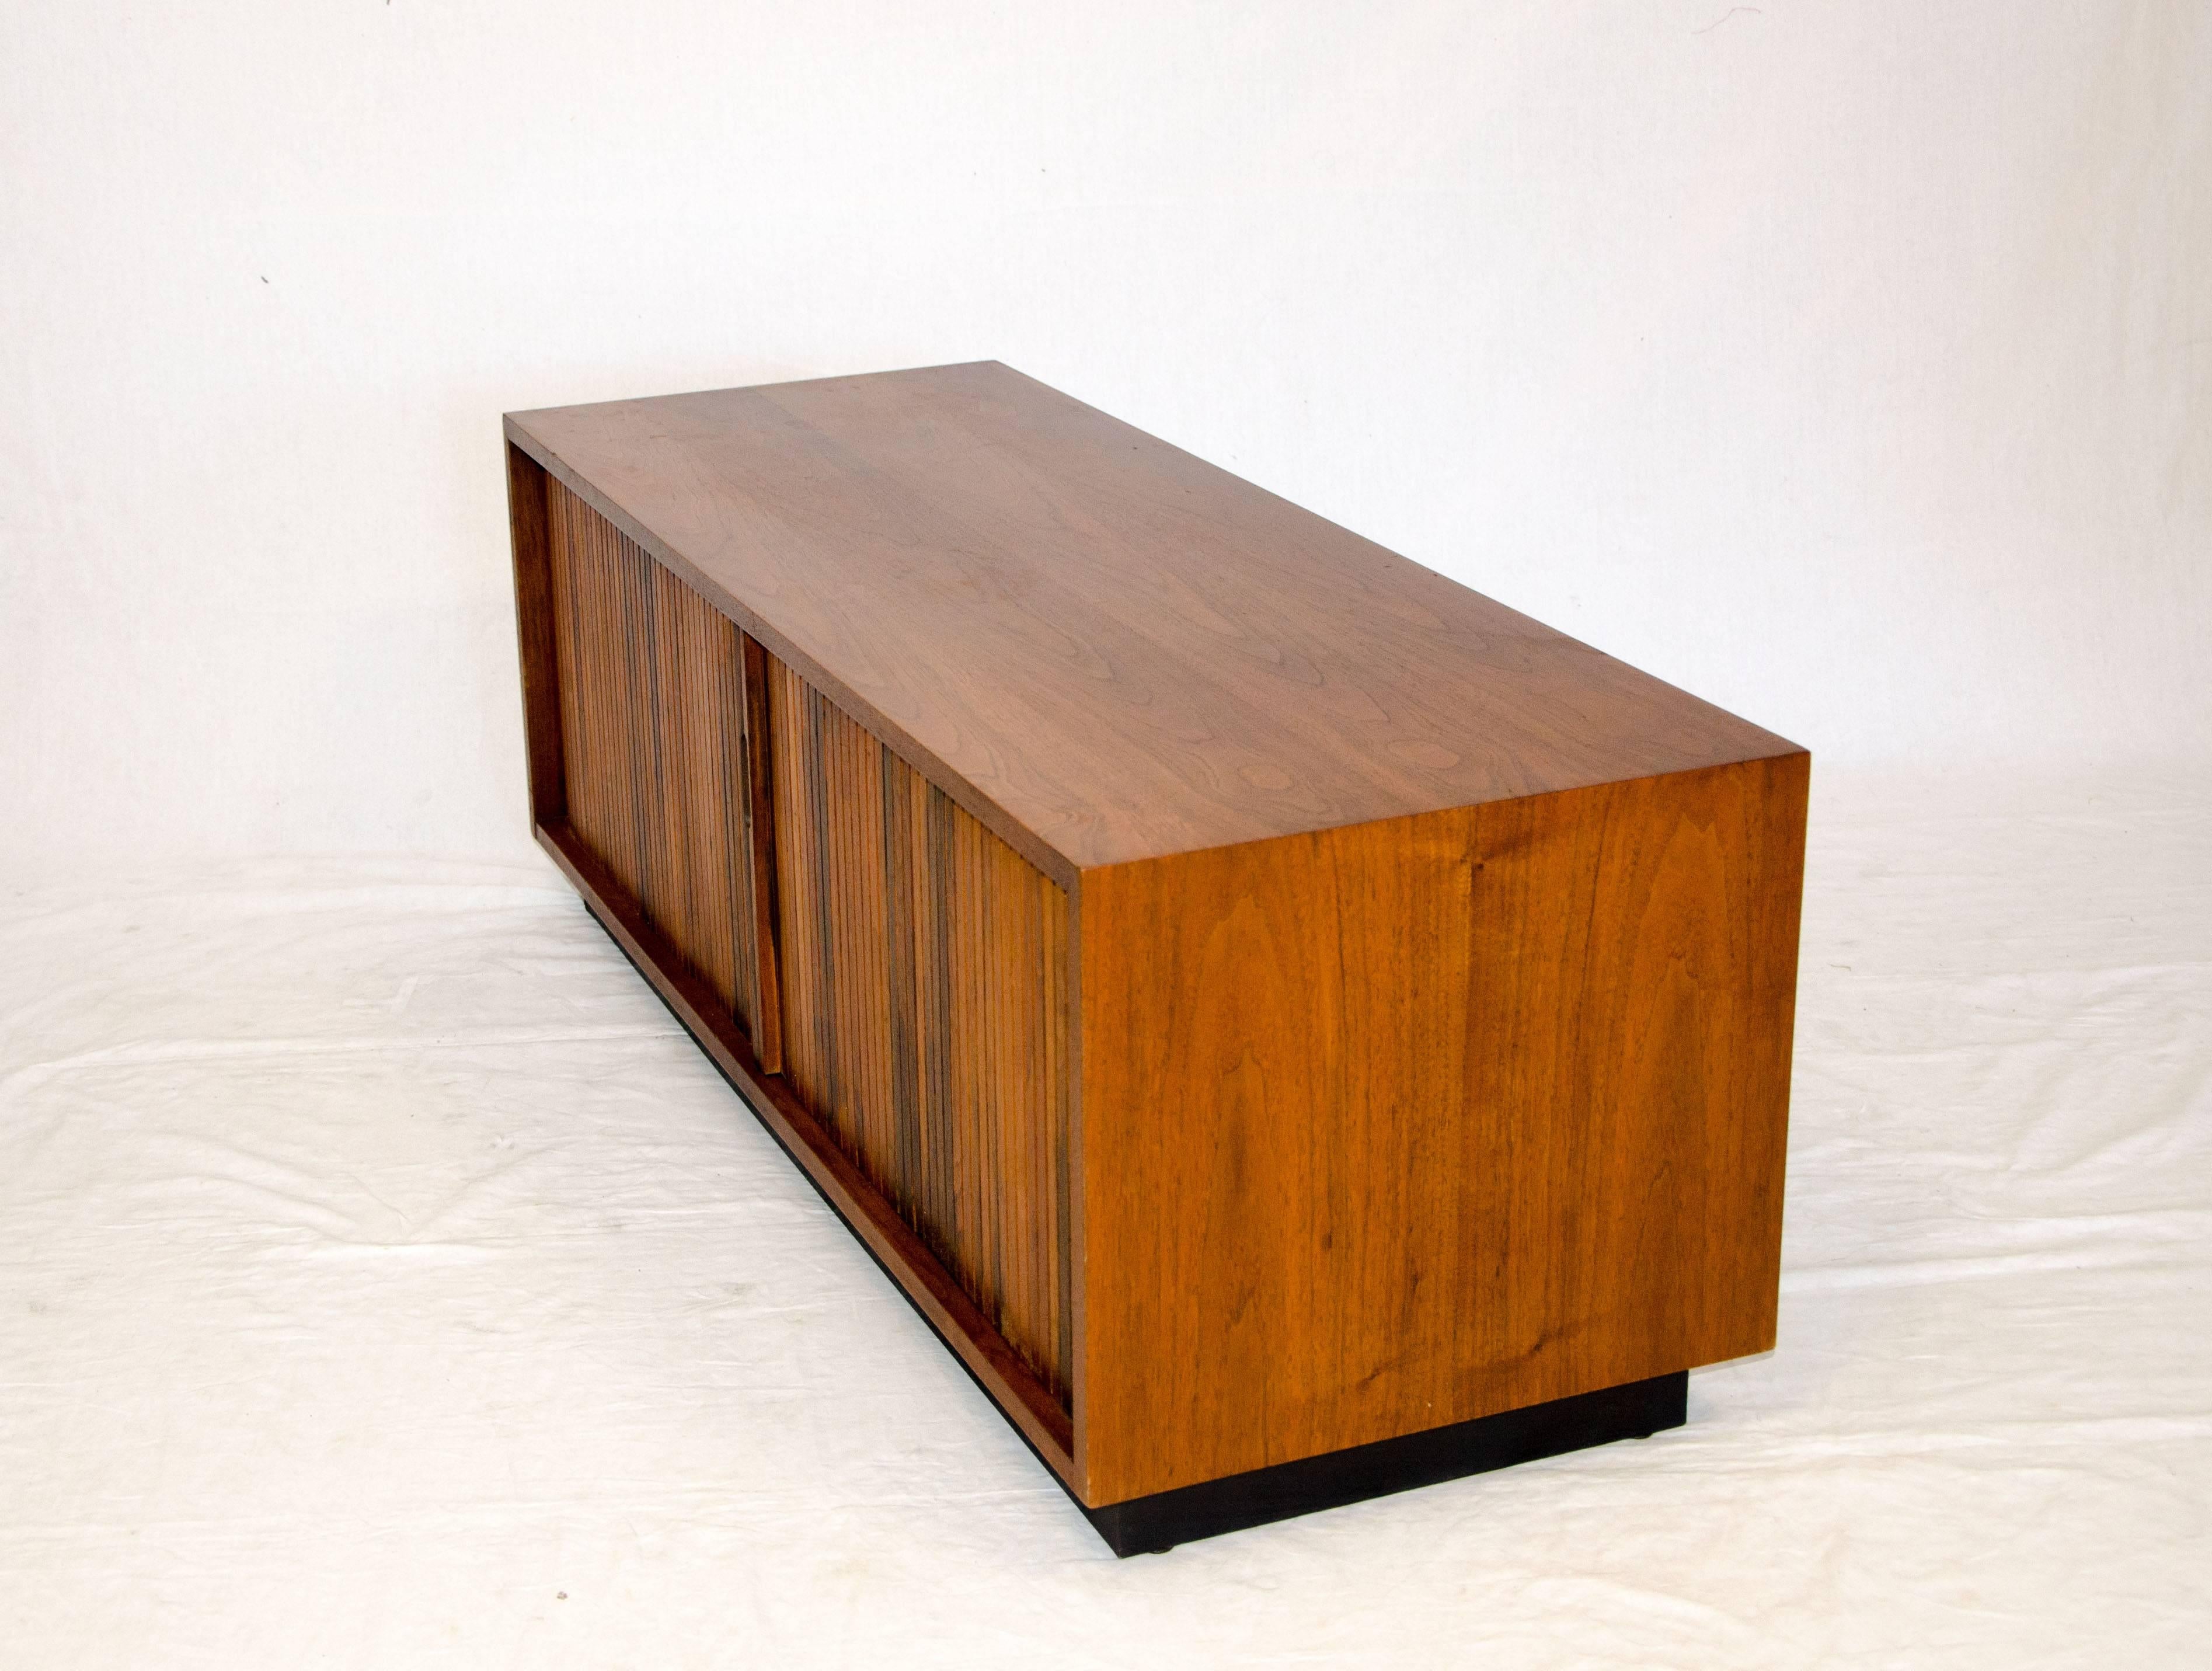 Low walnut cabinet made for record storage but also would be good for a flat screen stand as well as a bench with a cushion on top. The cabinet is on a plinth base which is removable if stainless or hairpin legs are installed for increased height.